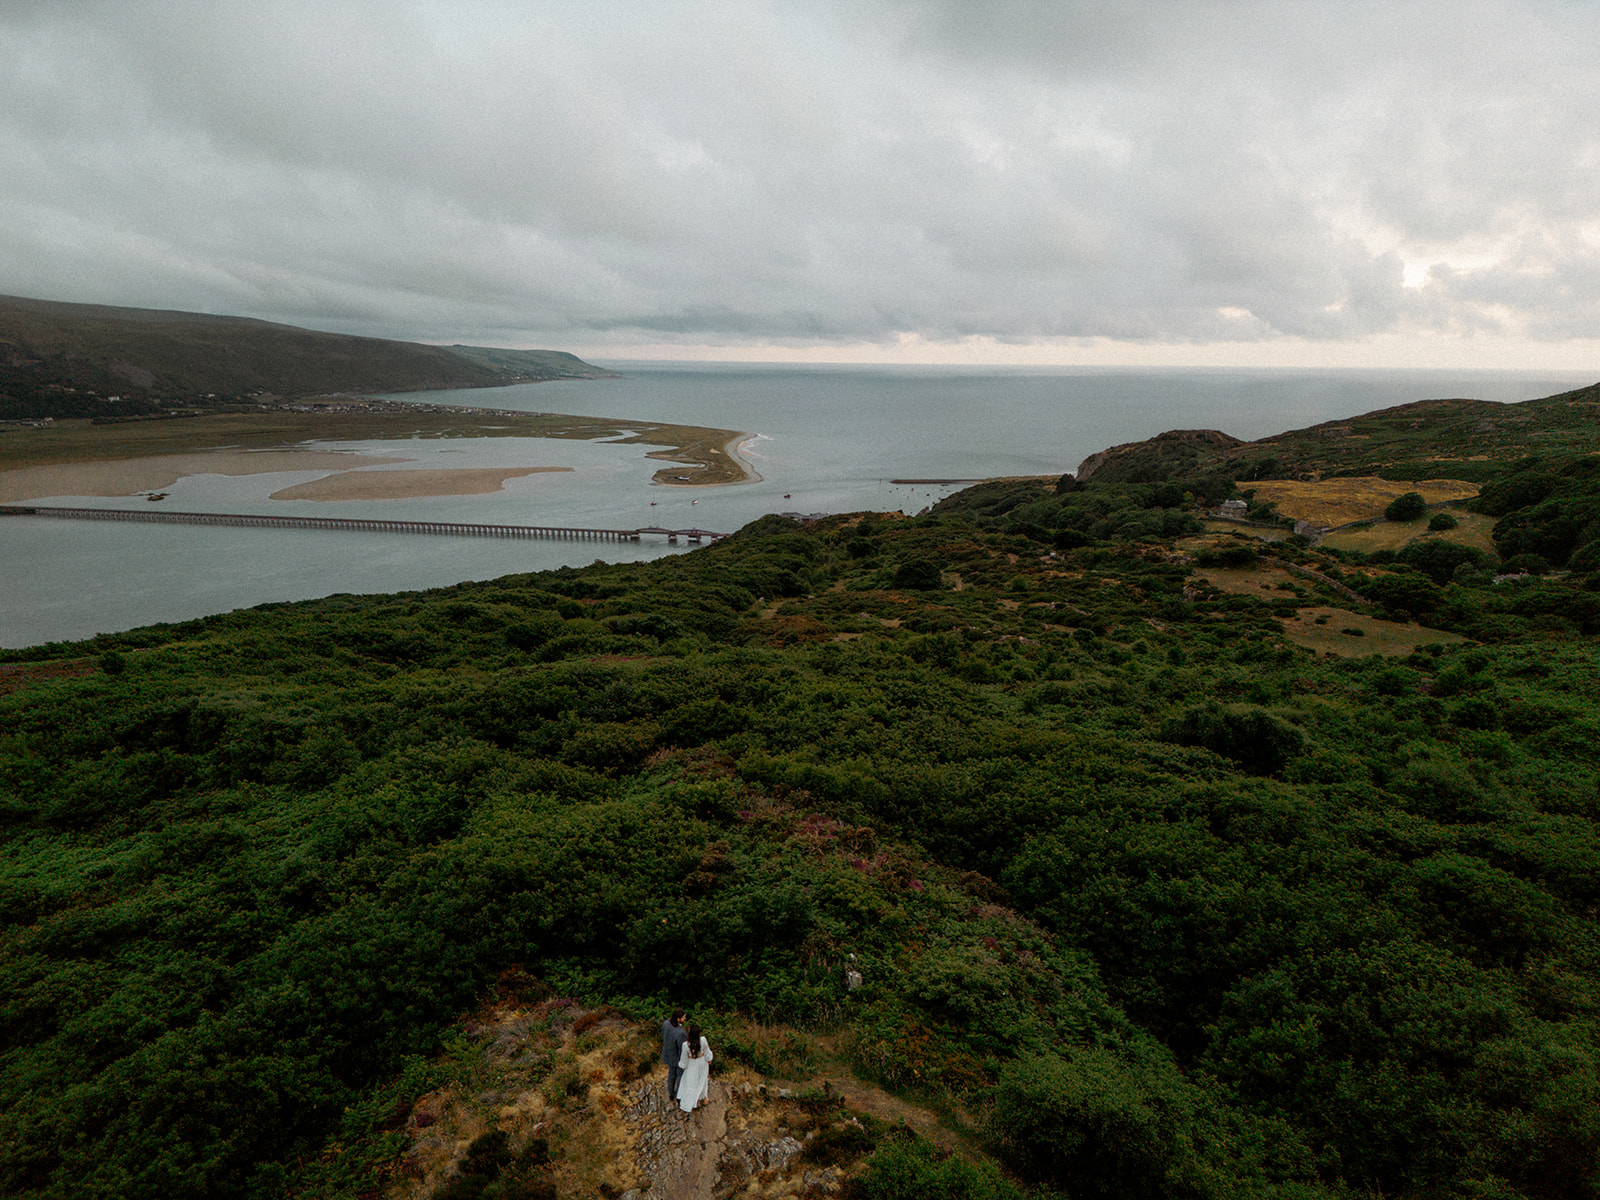 Adventure Couple Photography Session around the Mawddach Estuary at sunset